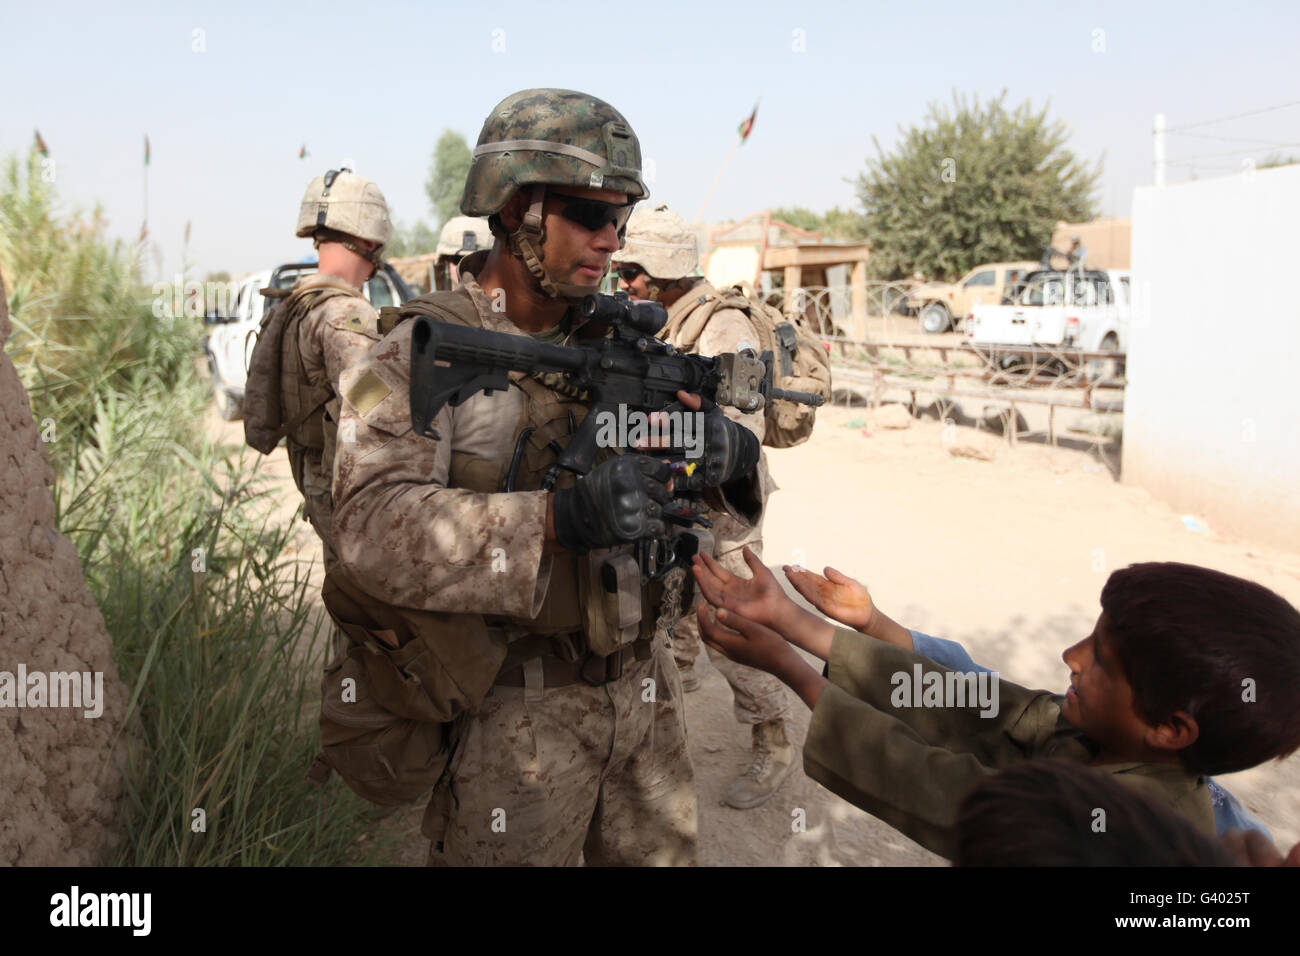 A U.S. Marine gives a piece of candy to an Afghan boy during a patrol. Stock Photo